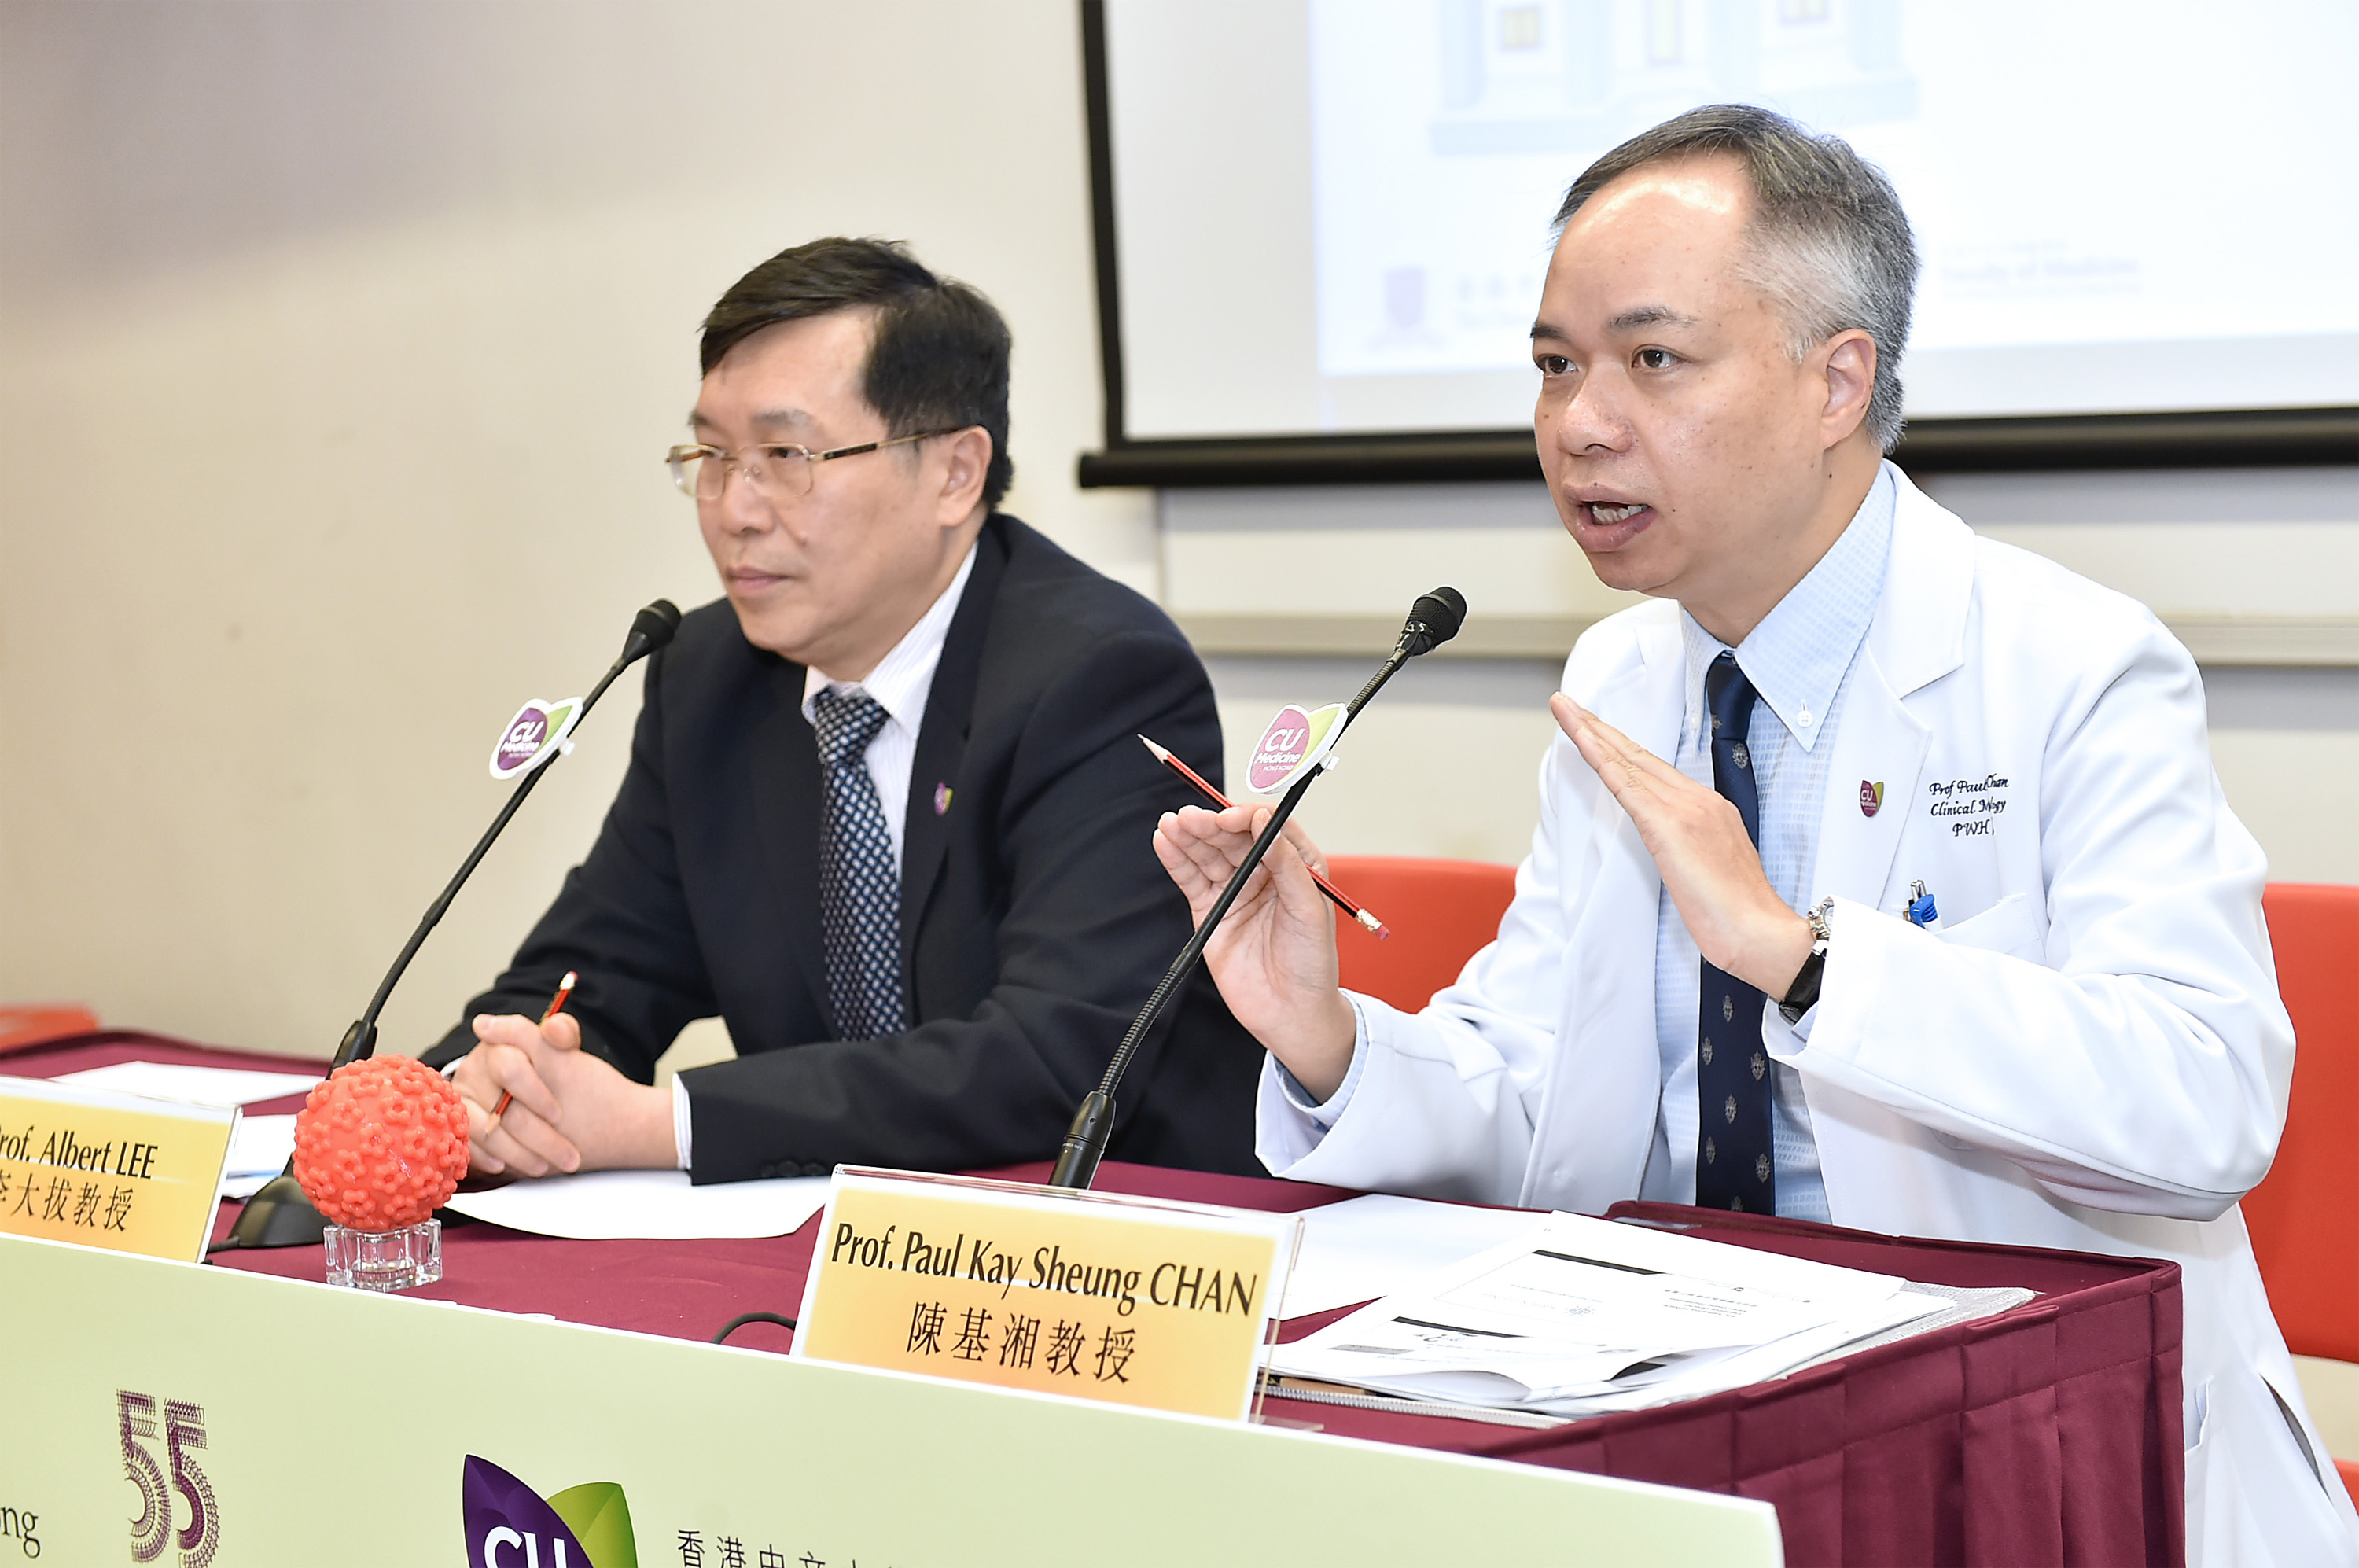  Professor Paul CHAN (right) foresees a 10-fold increase in uptake rate after a systematic school-based HPV vaccination programme is implemented in Hong Kong.